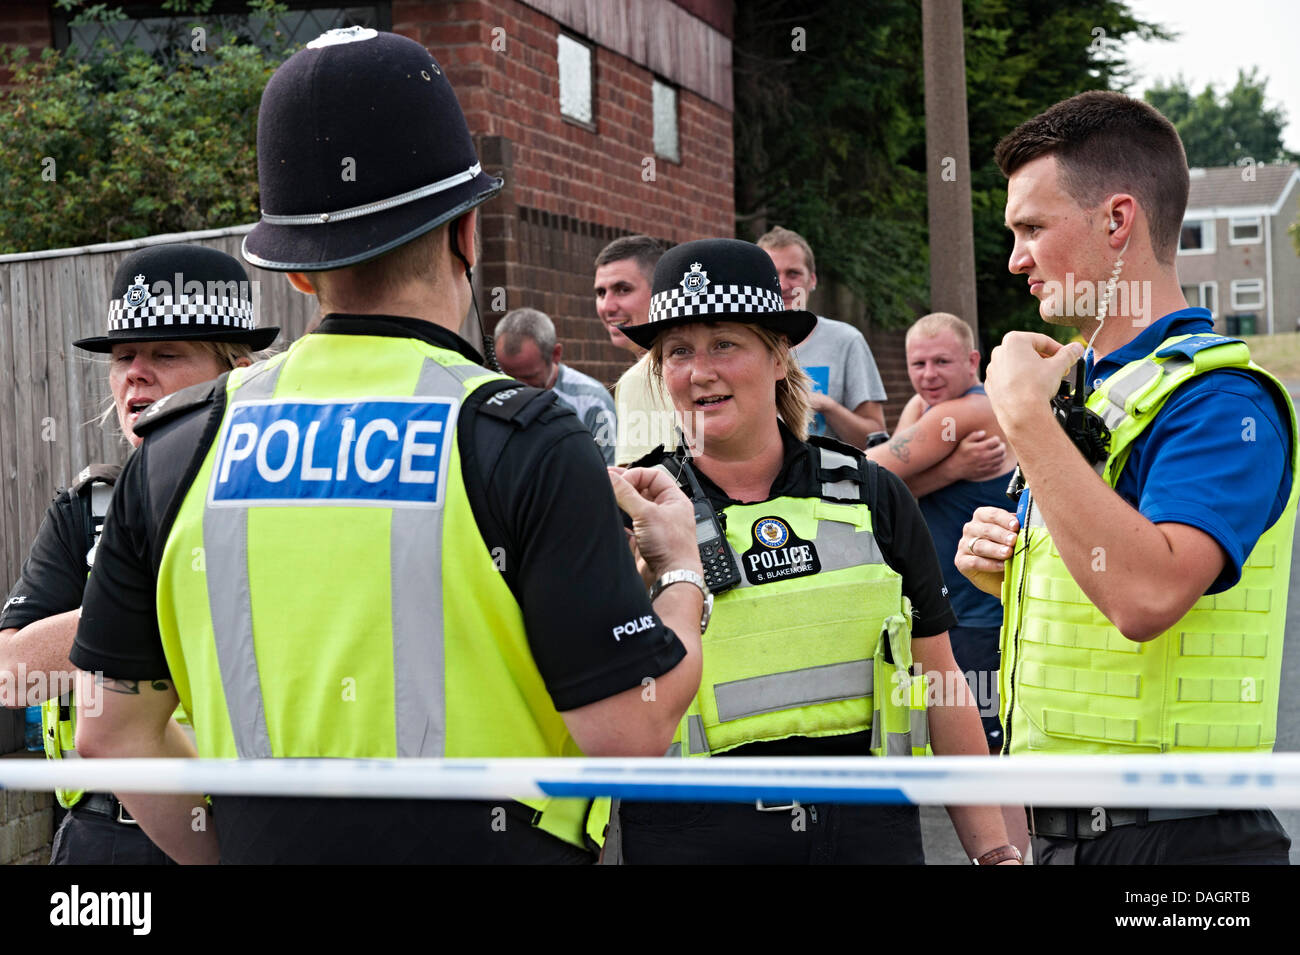 Tipton, West Midlands, UK. 12th July 2013. Mosque nail bomb Credit:  i4images/Alamy Live News police and pcsos talk to each other behind the cordon Stock Photo